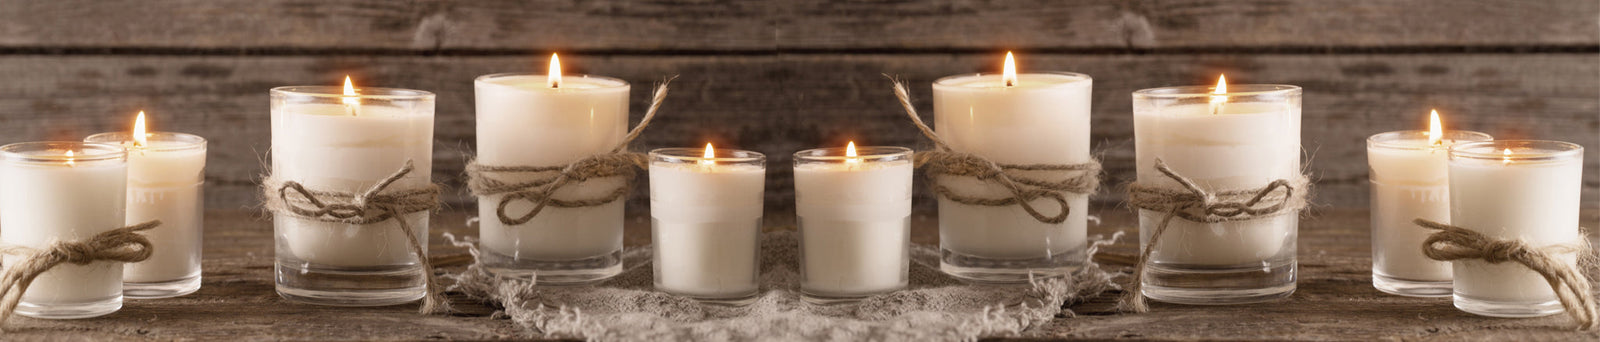 Candle Making Wicks - All Australian Candle Making Supplies and Kits -  Sydney - CandleMaking